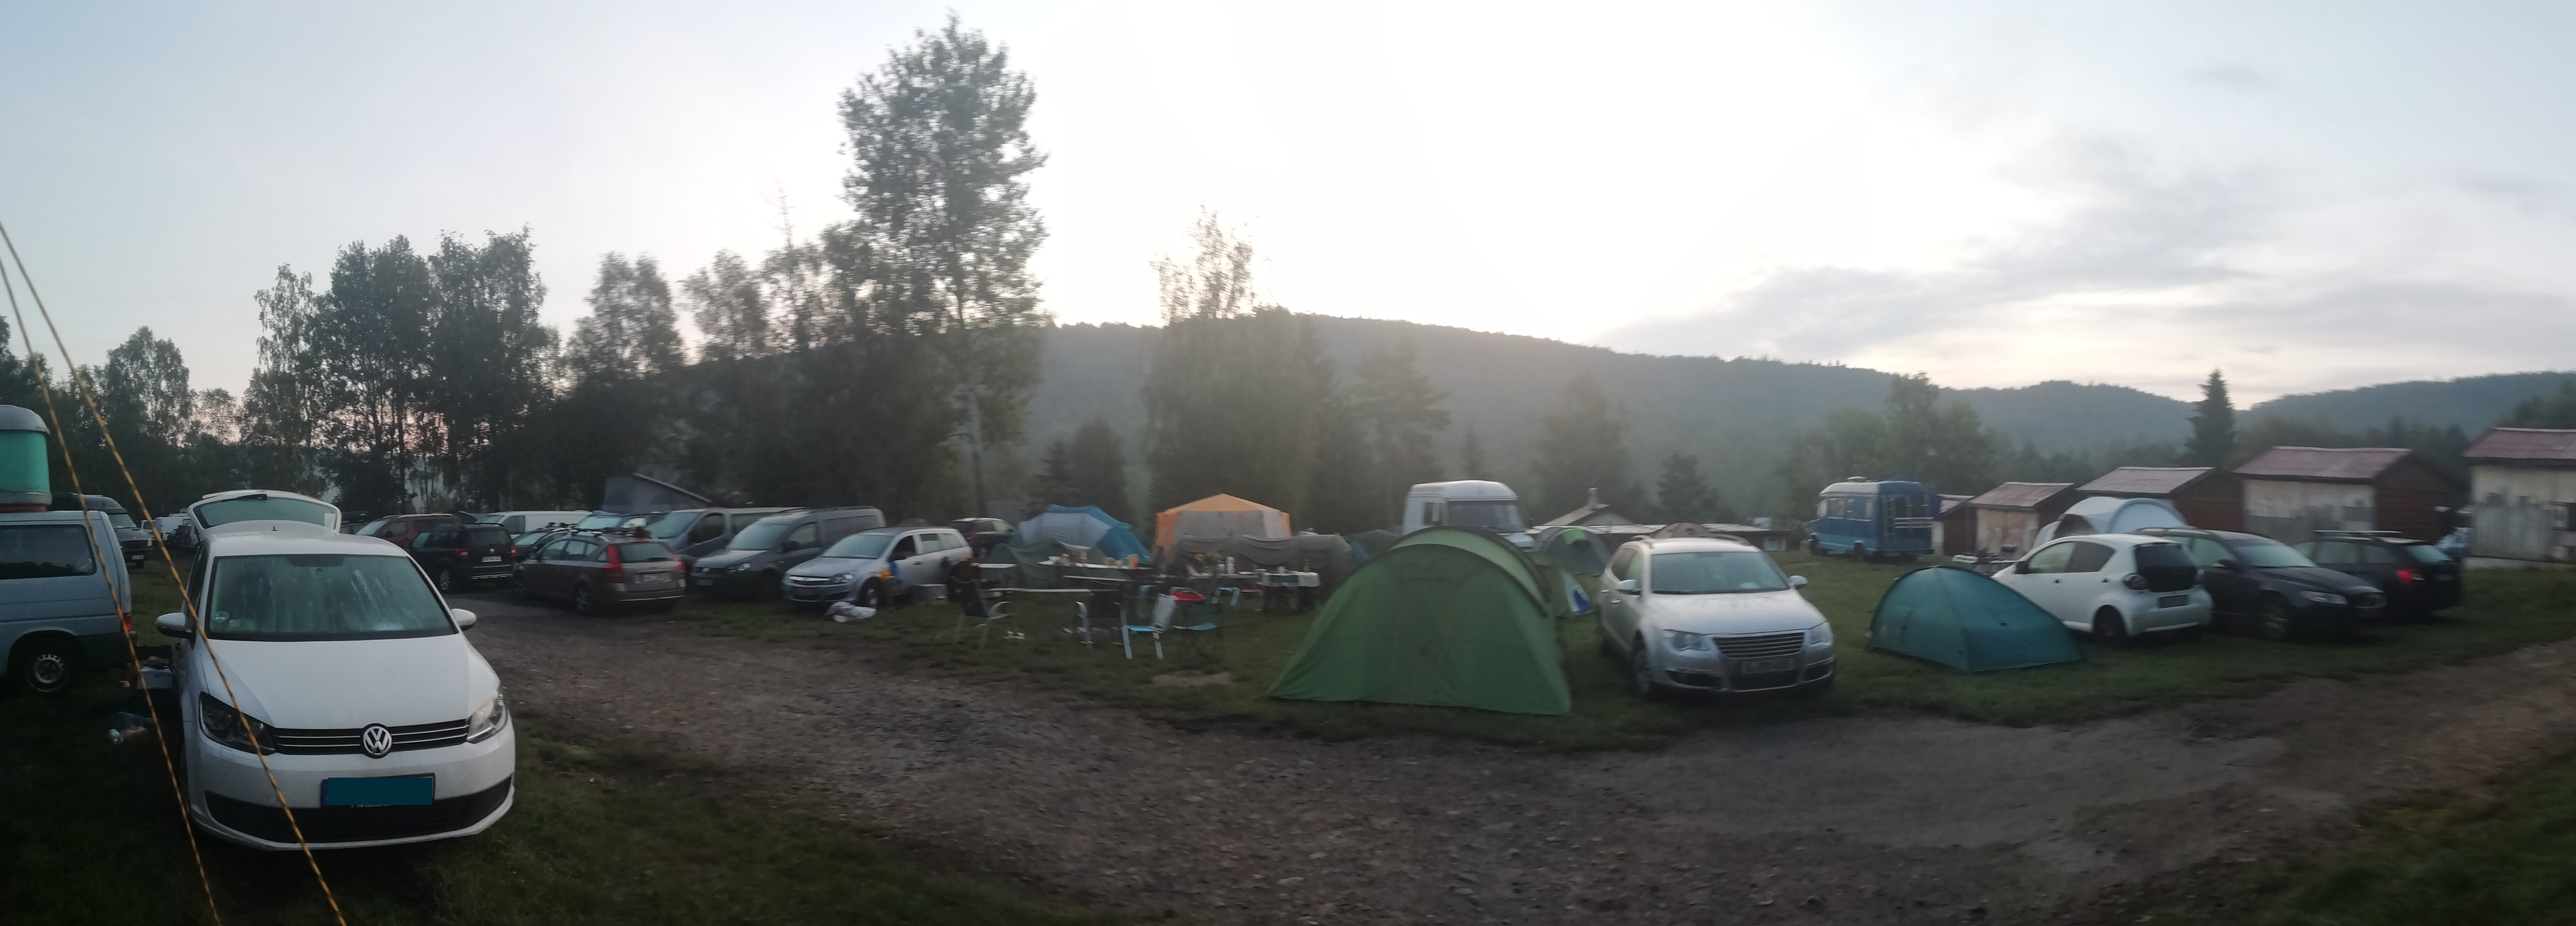 Camping in Tschechien